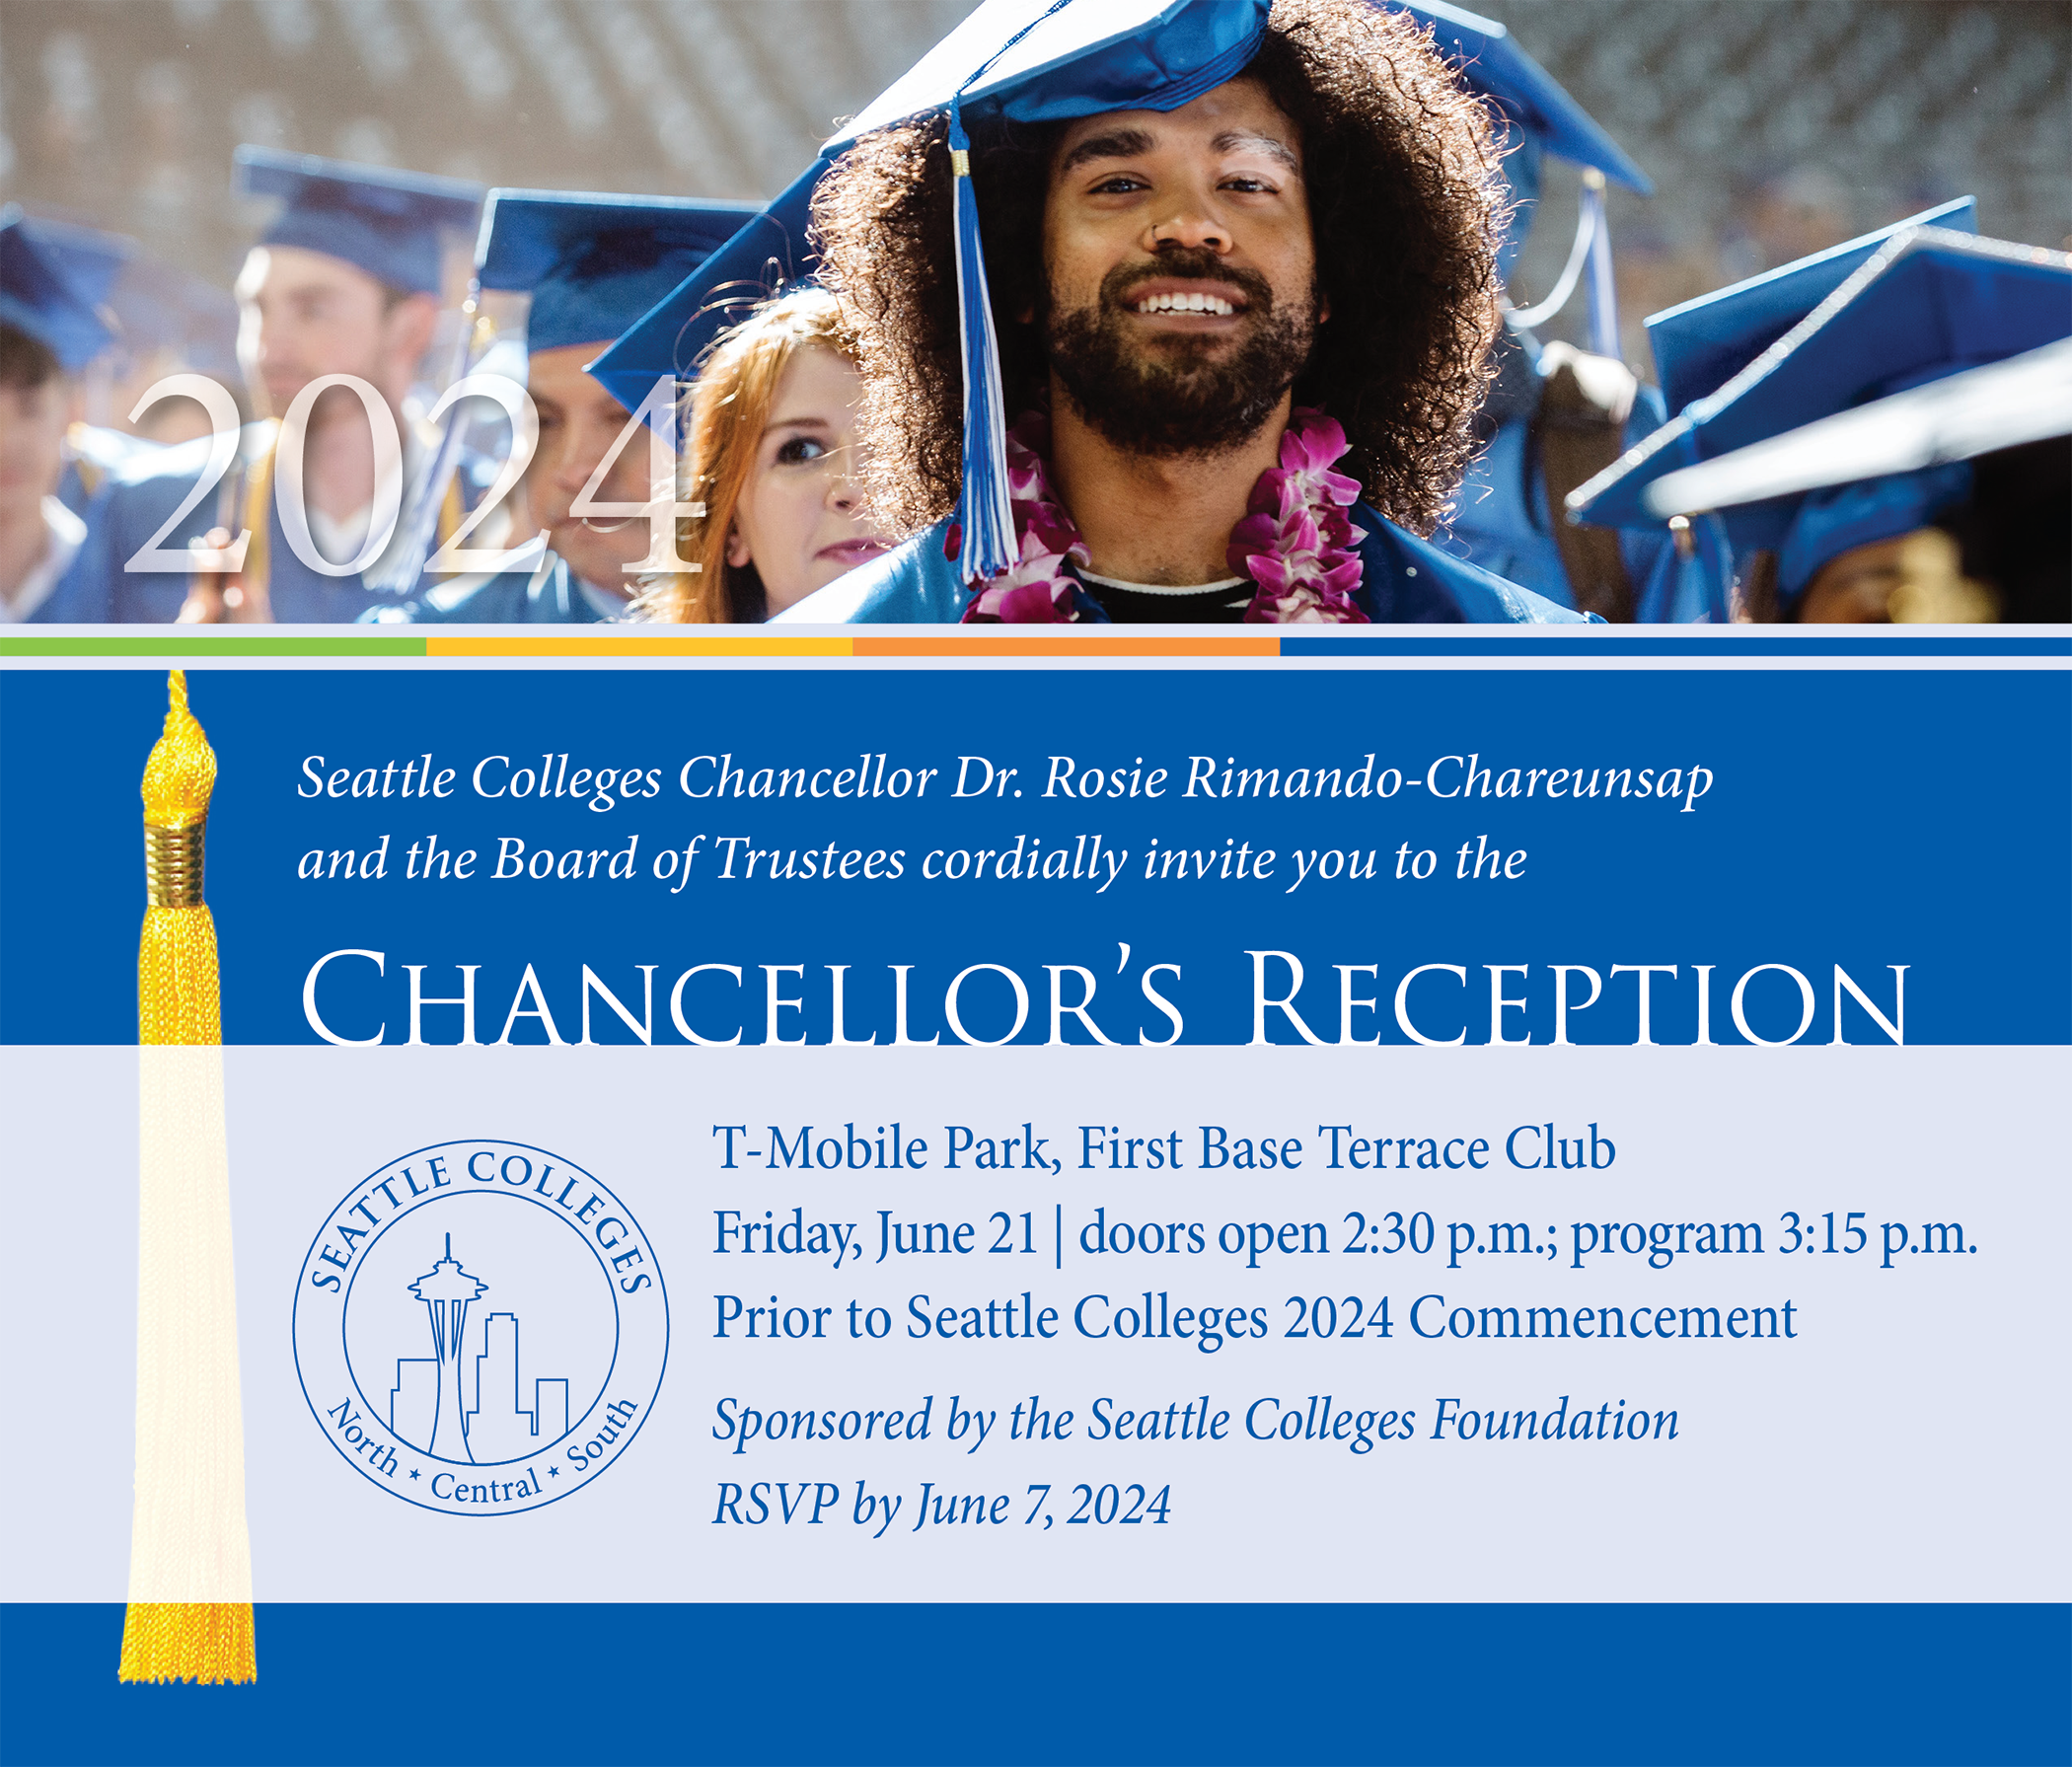 Image of students in caps and gowns with text:  Seattle Colleges Chancellor Dr. Rosie Rimando-Chareunsap and the Board of Trustees cordially invite you to the Chancellor's Reception Friday, June 21, doors open at 2:30 p.m., program 3:15 p.m., T-Mobile Park, First Base Terrace Club. Sponsored by the Seattle Colleges Foundation.